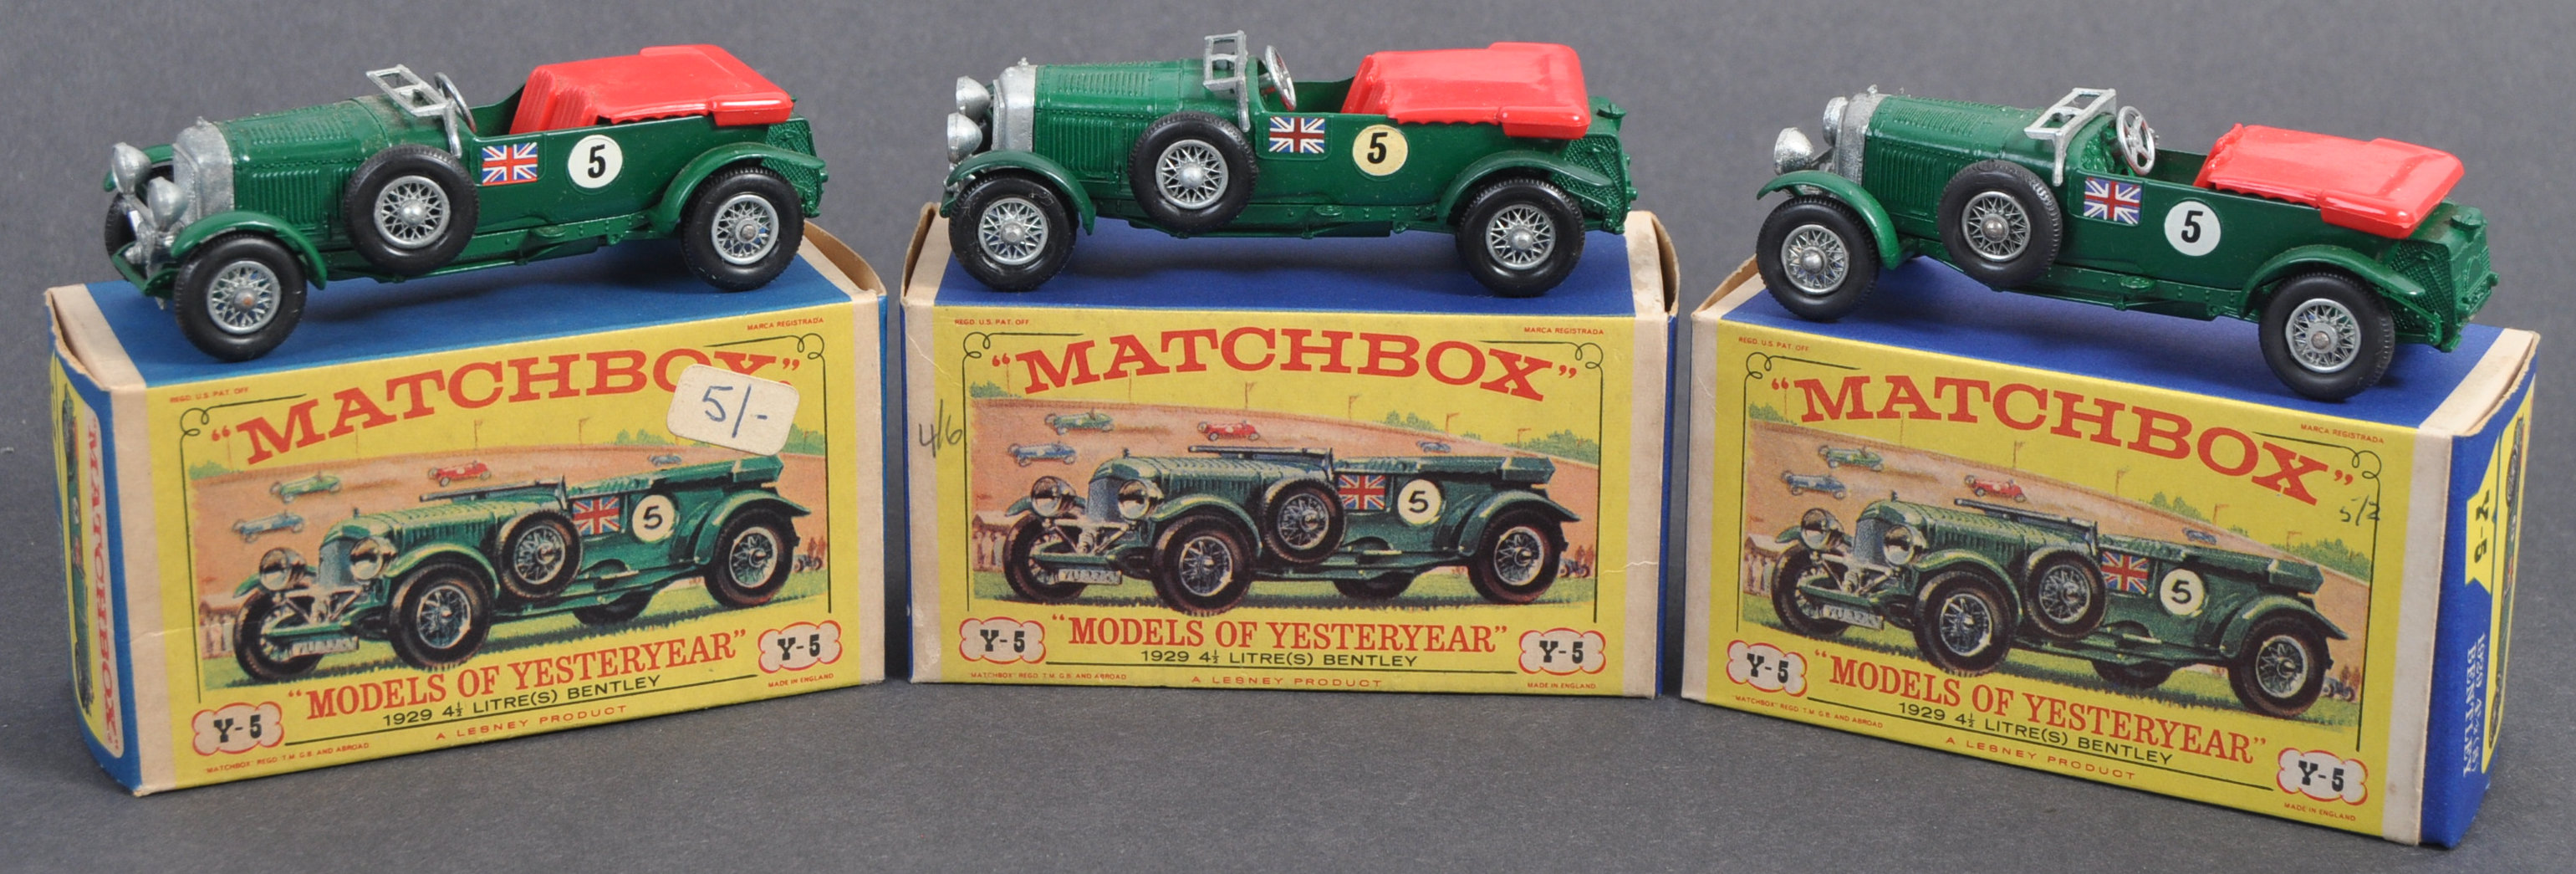 MATCHBOX MODELS OF YESTERYEAR - 1929 BENTLEY COLLECTION